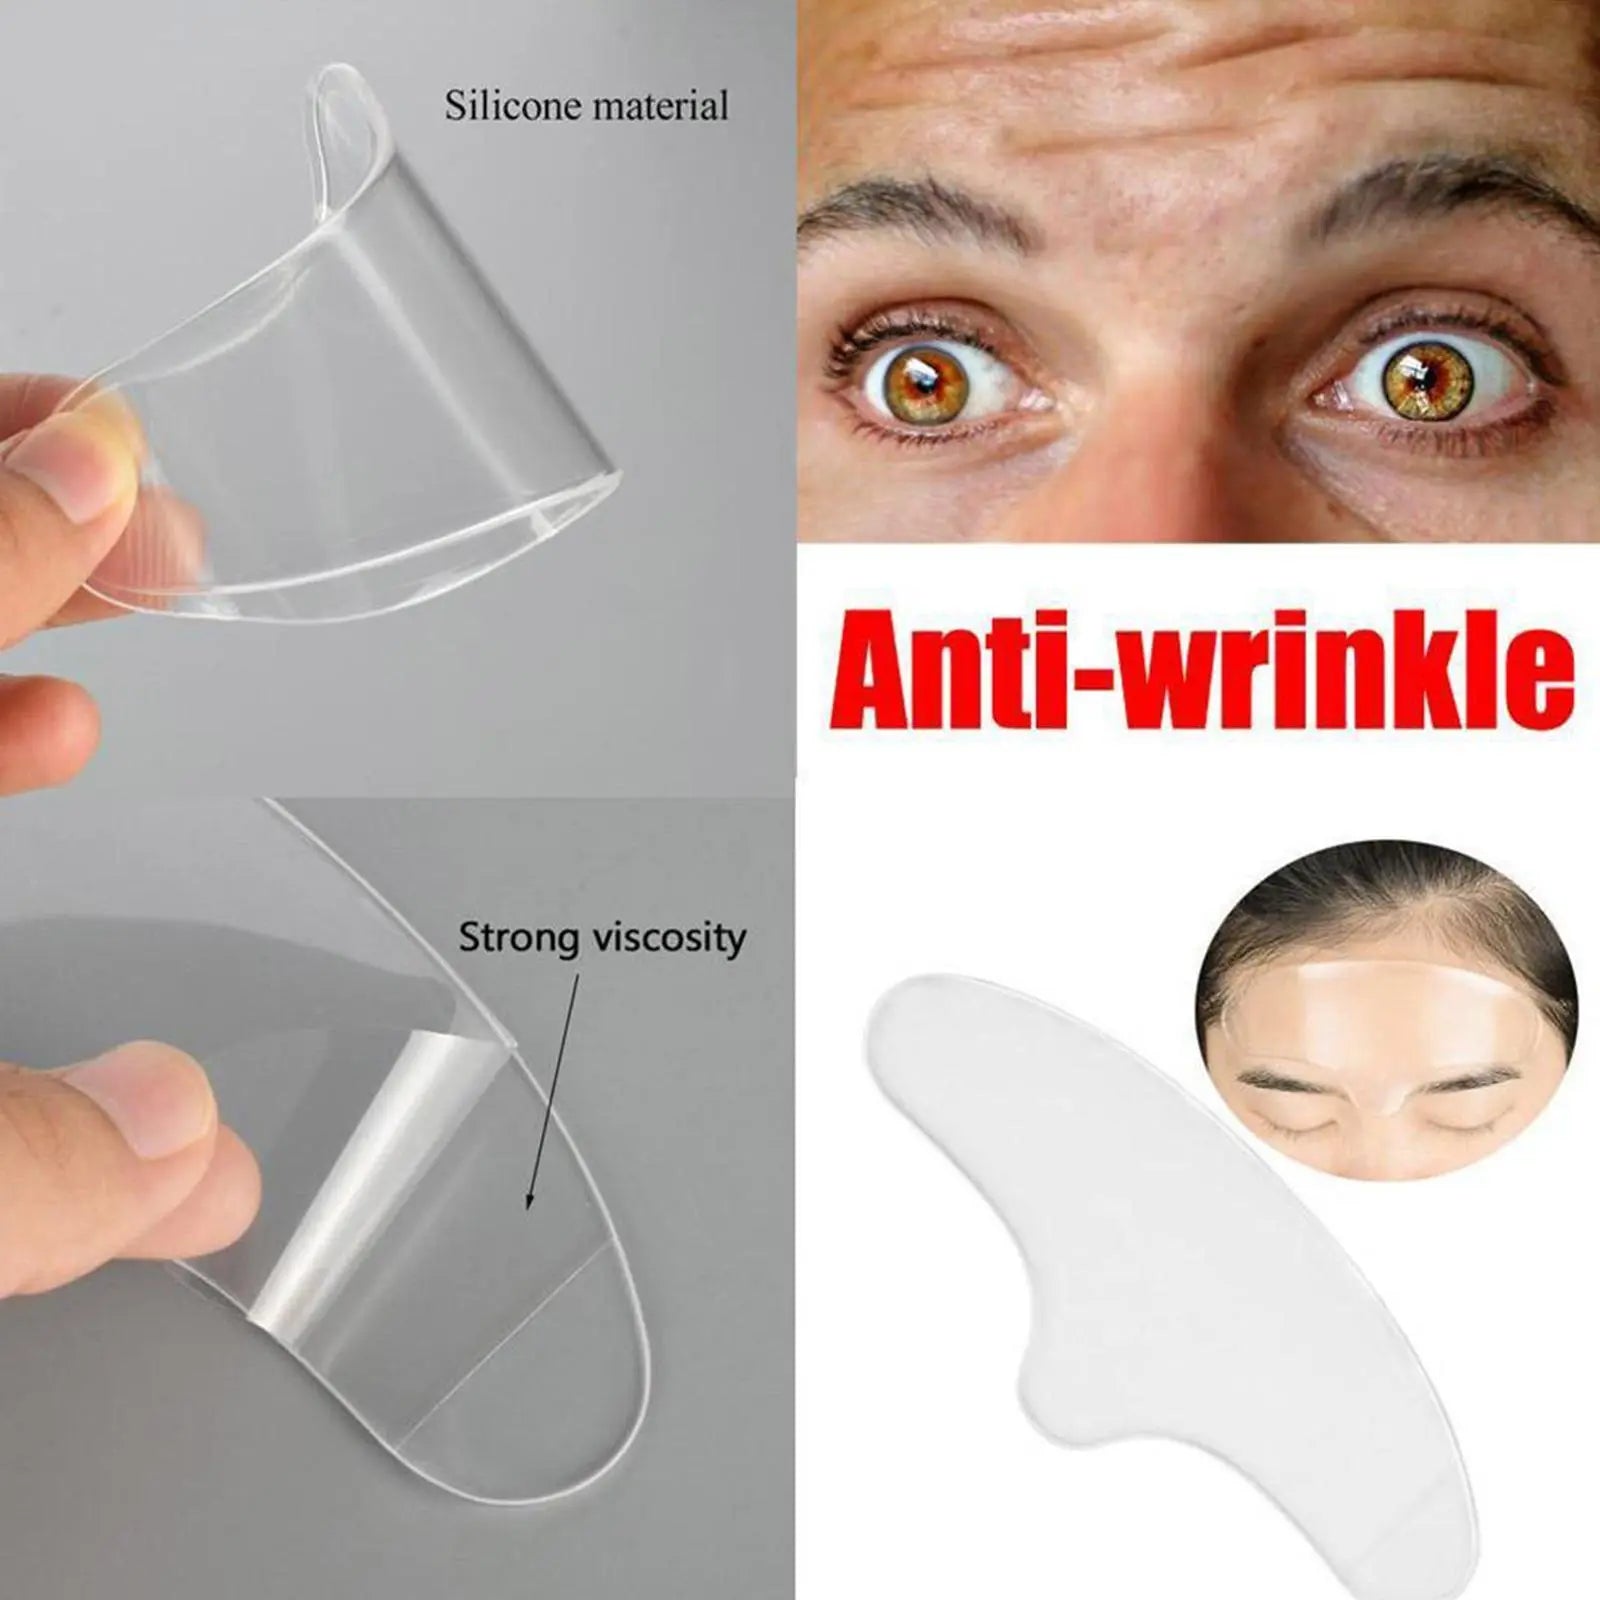 Anti Wrinkle Forehead Patch Forehead Line Removal Gel Patch Eye Mask Firming Lift Up Mask Stickers Anti-aging Face Skin Care  beautylum.com   